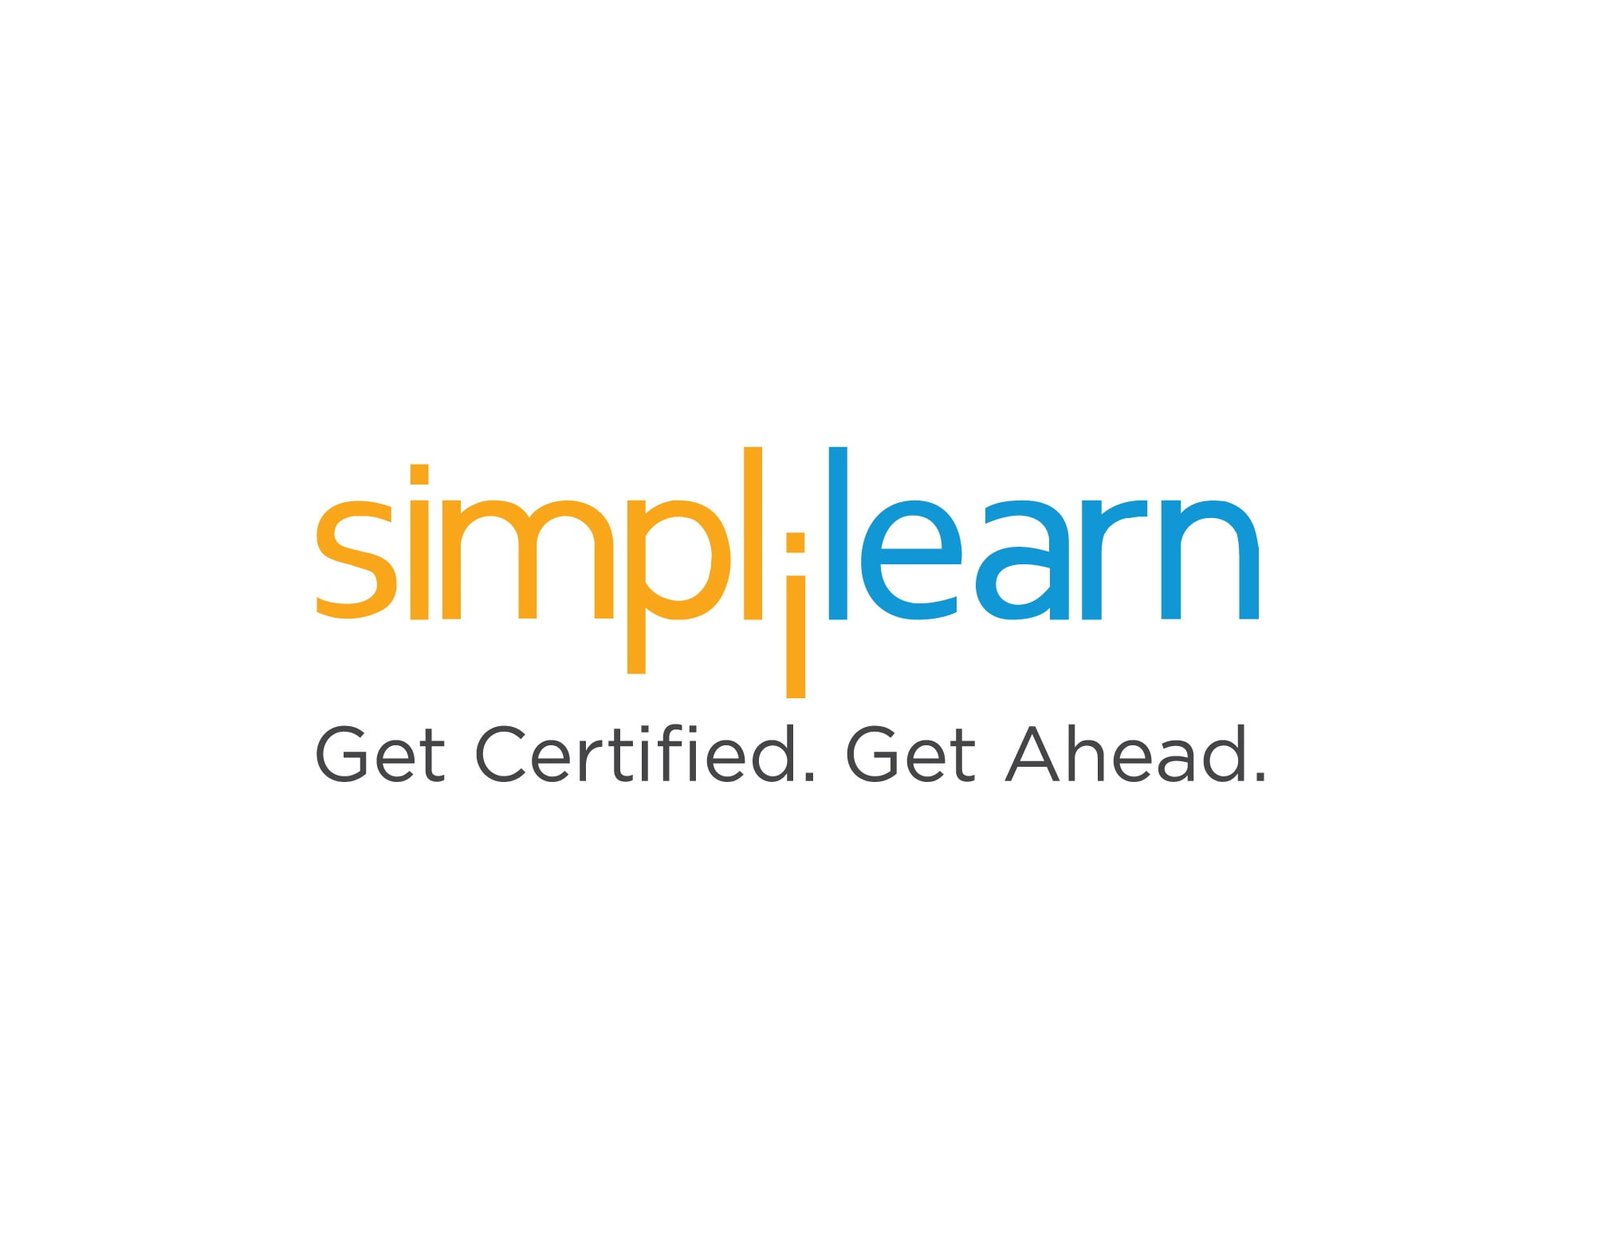 Simpilearn off campus drive